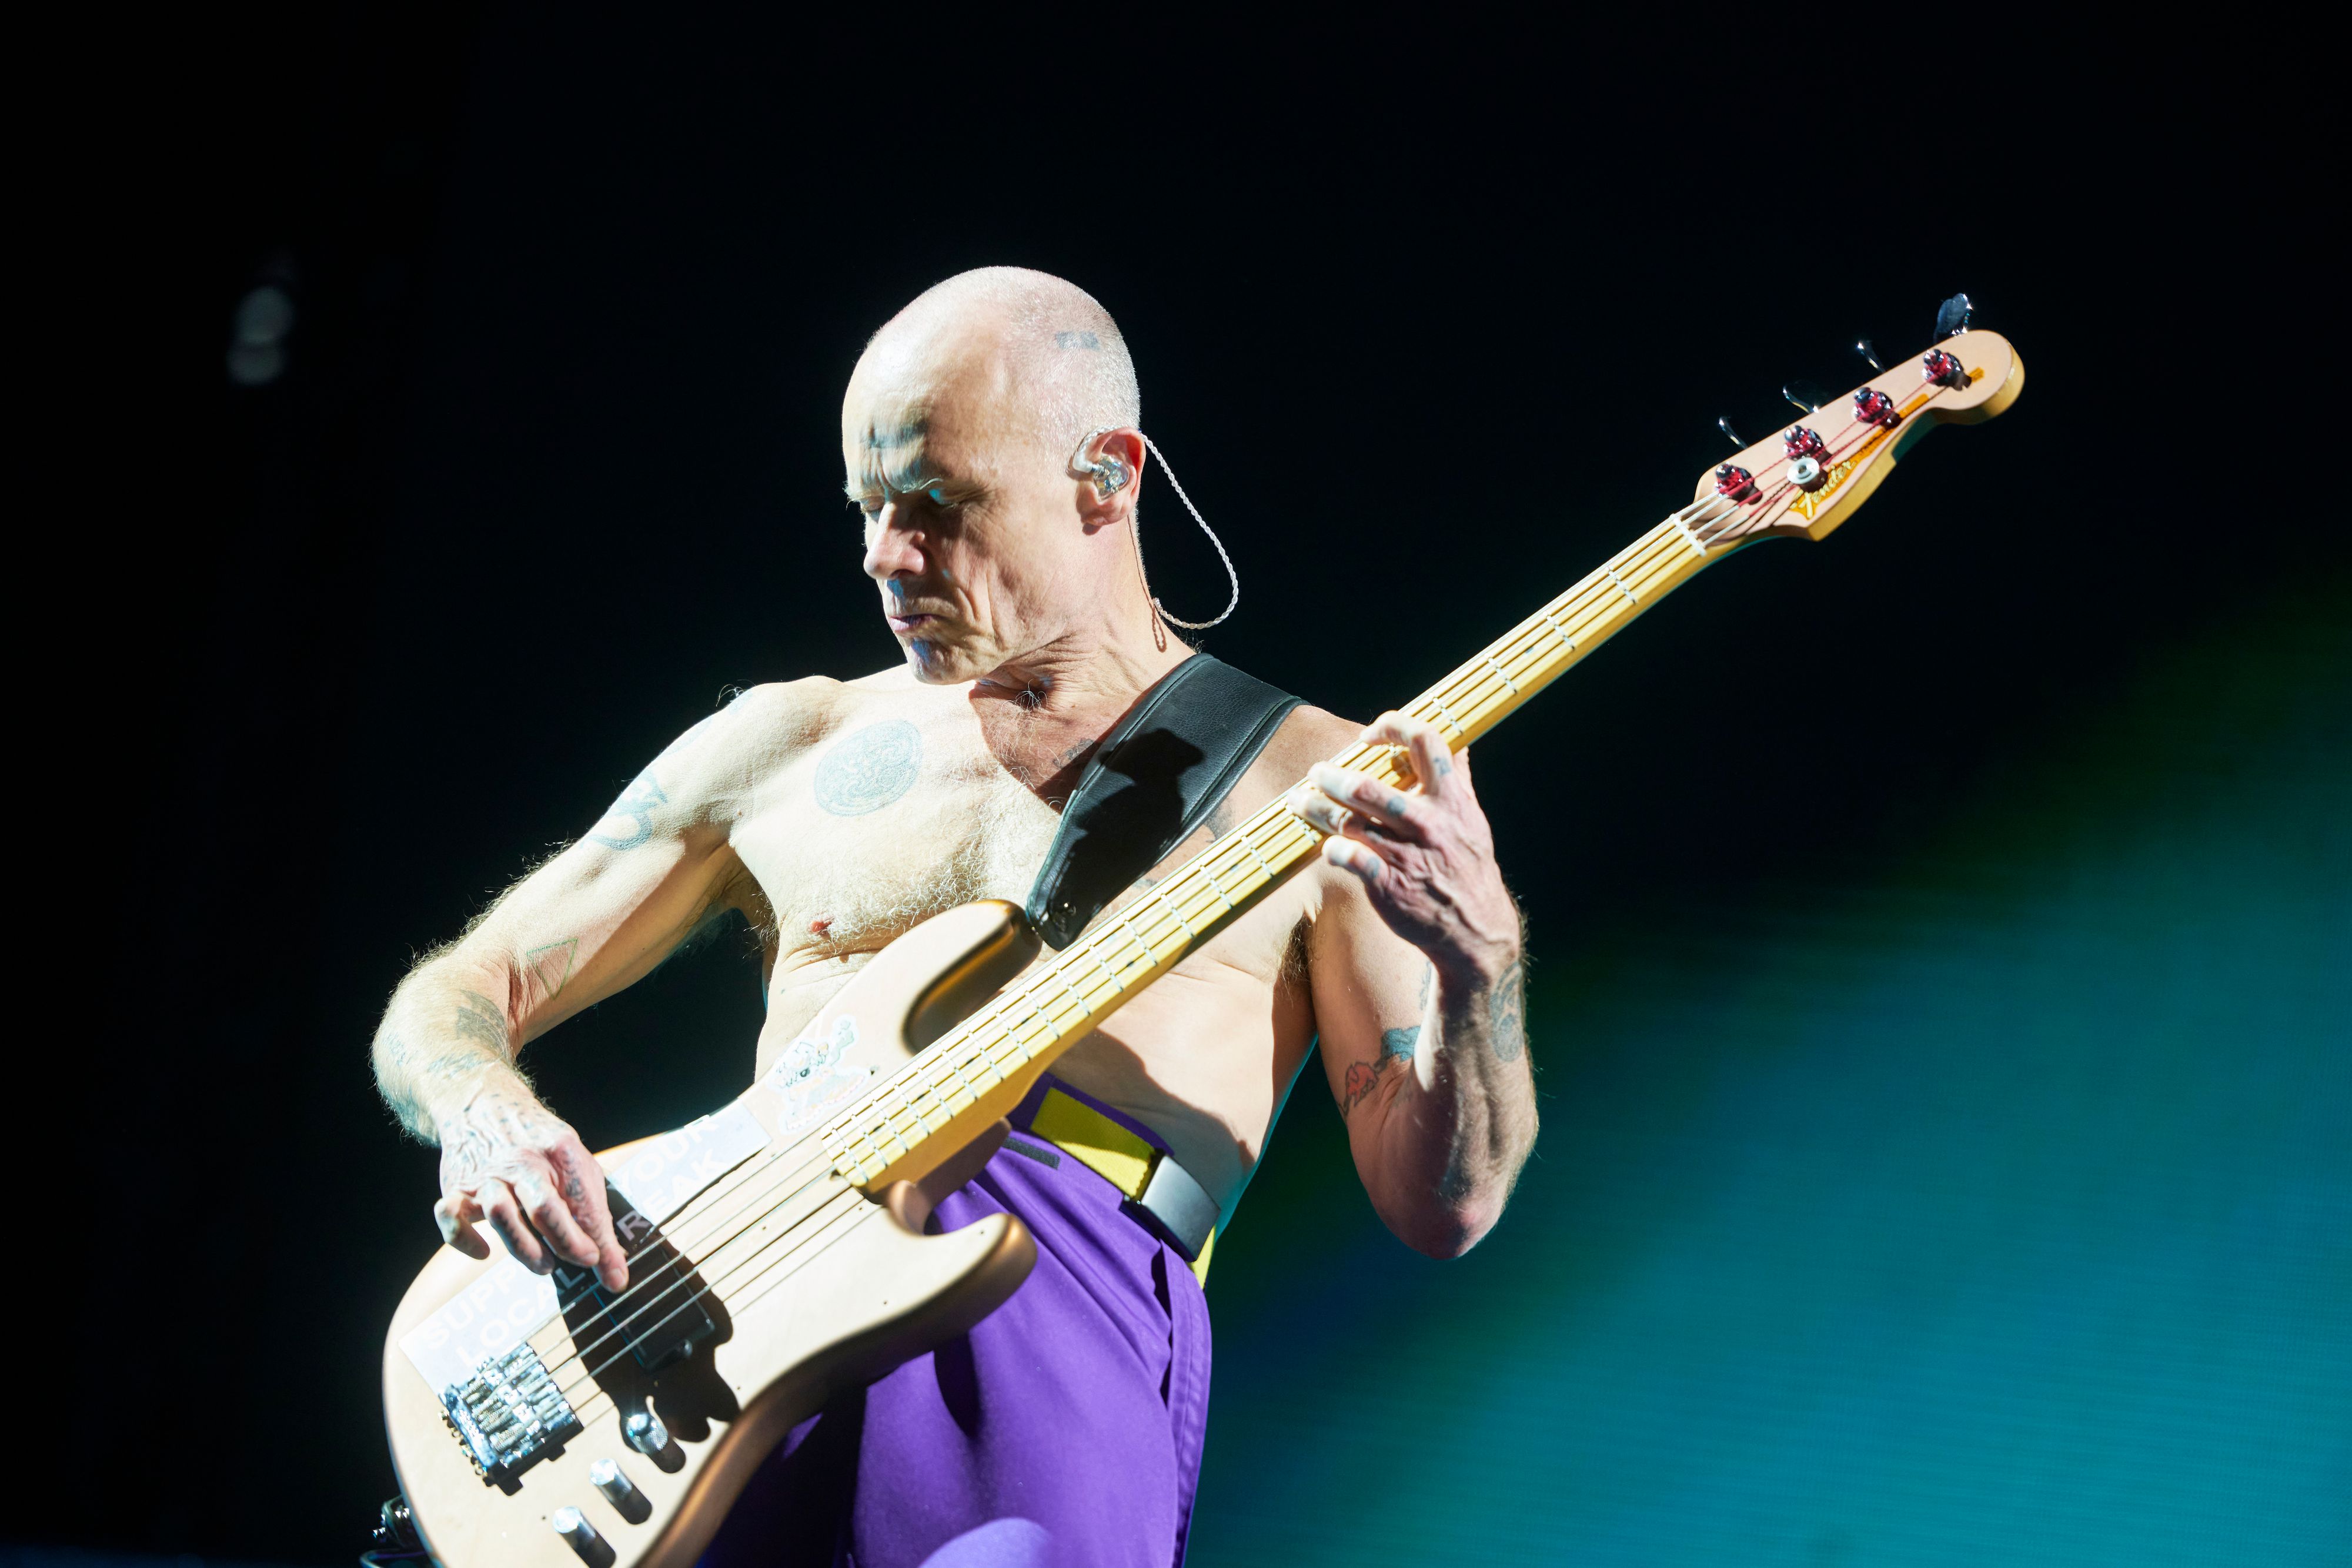 Red_Hot_Chili_Peppers_230408_TN_058.jpg